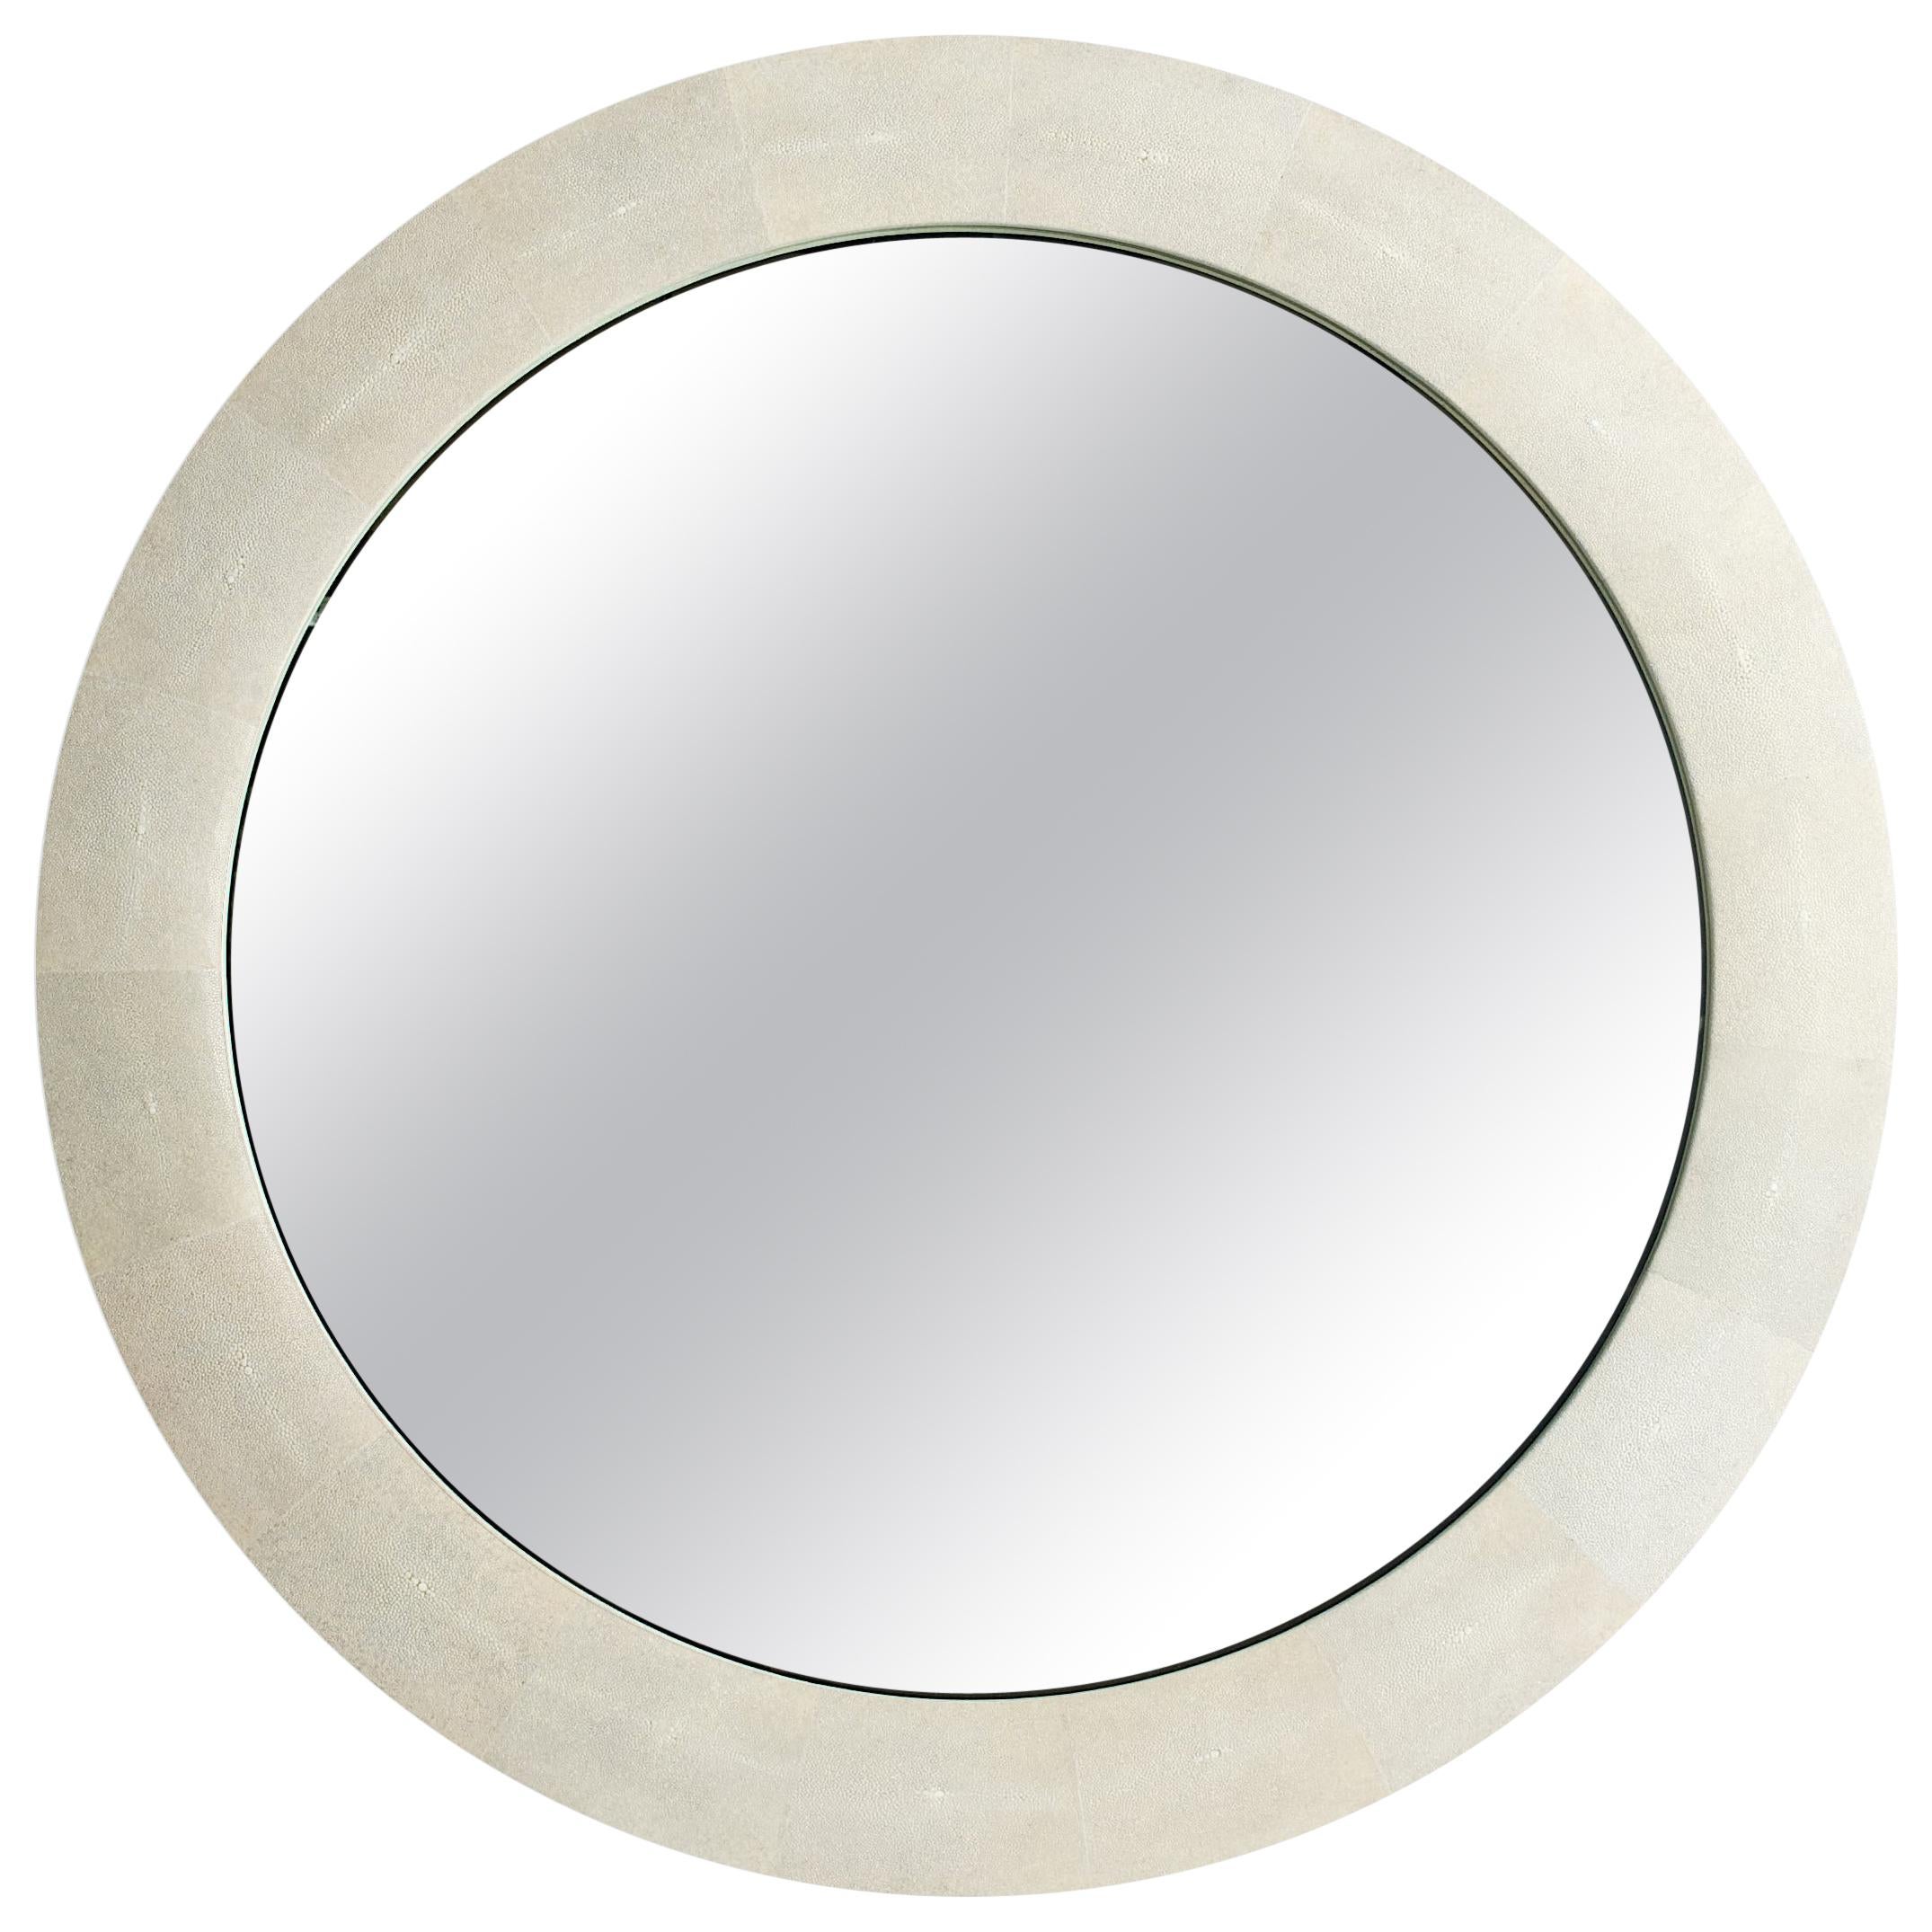 Ivory Shagreen Galucha Mirror by Elan Atelier (Preorder) For Sale